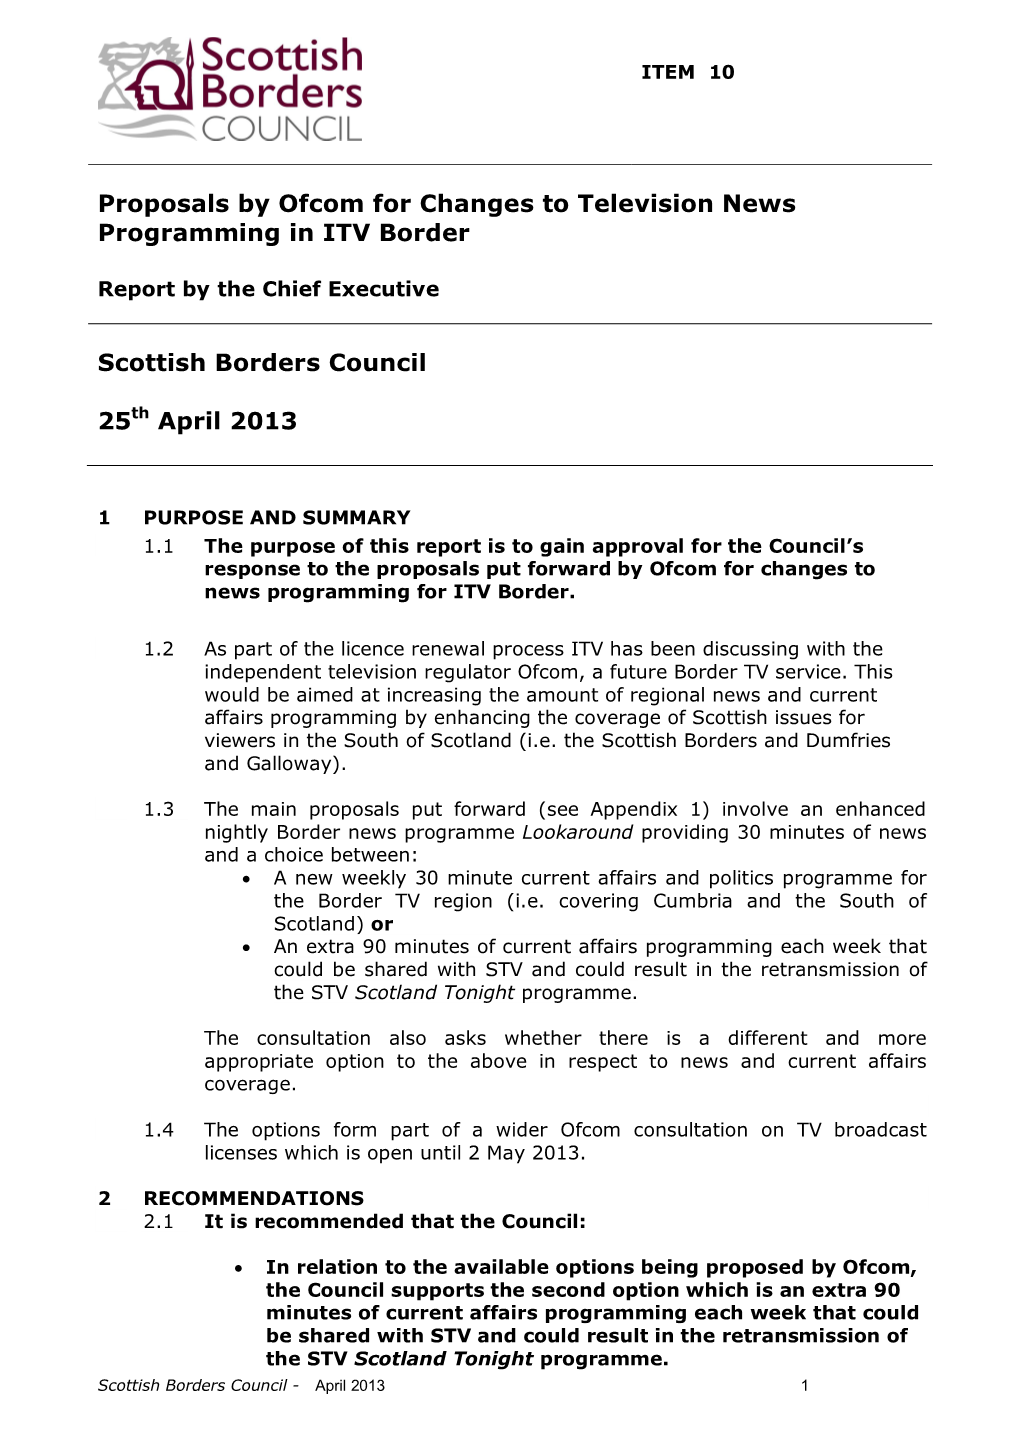 Proposals by Ofcom for Changes to Television News Programming in ITV Border